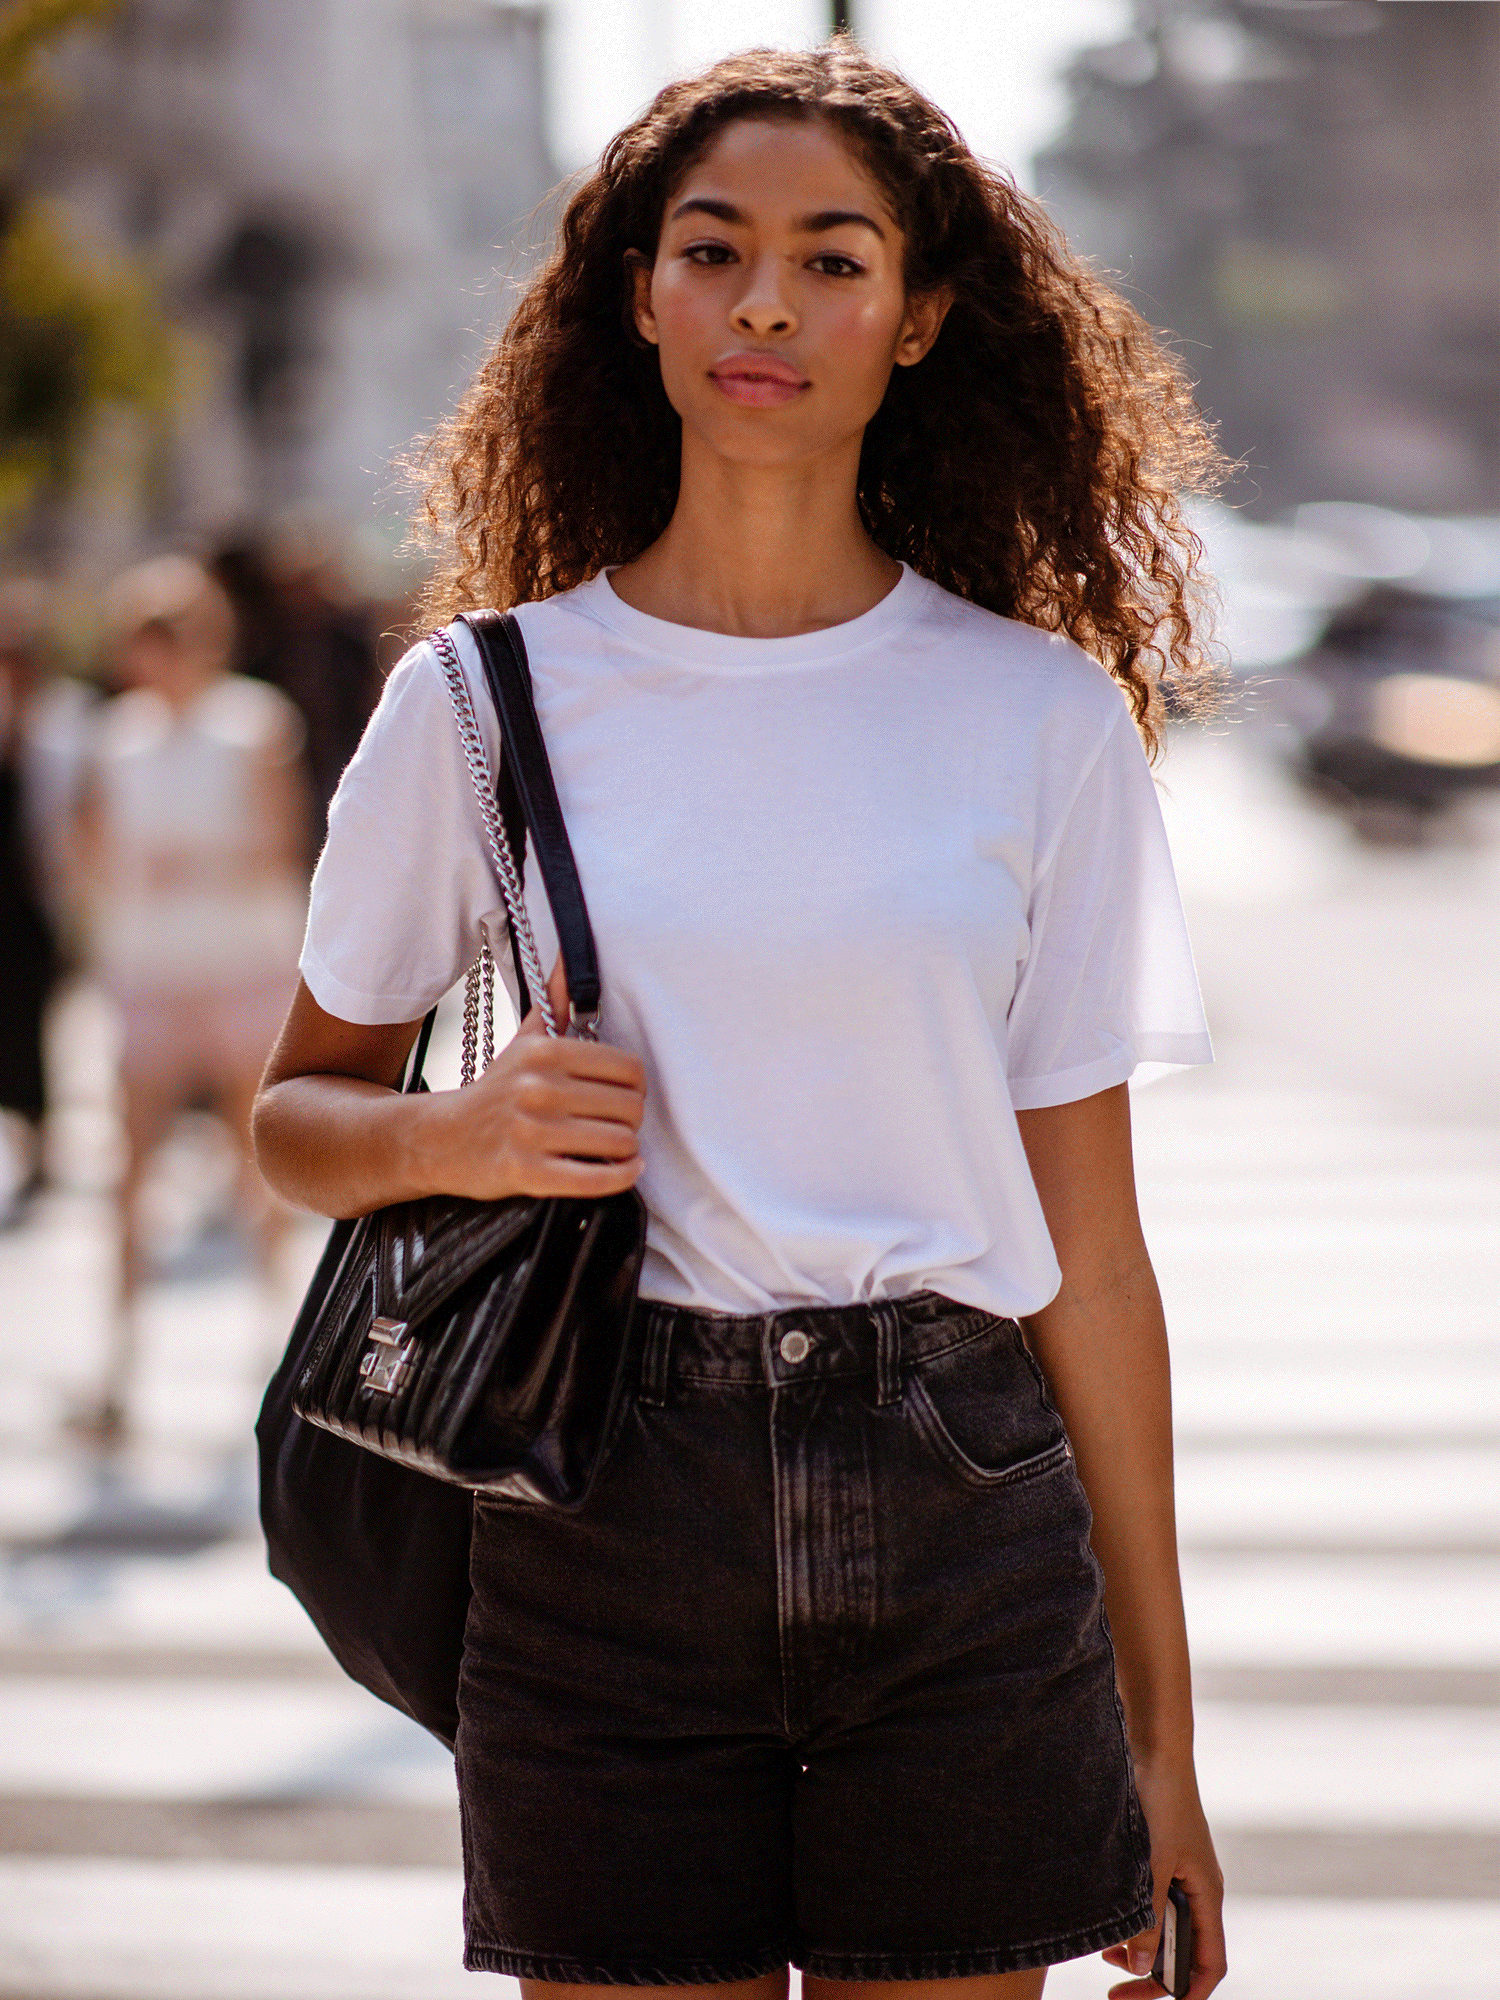 How To Wear A White T-Shirt: The Golden Style Rules To Know | PORTER